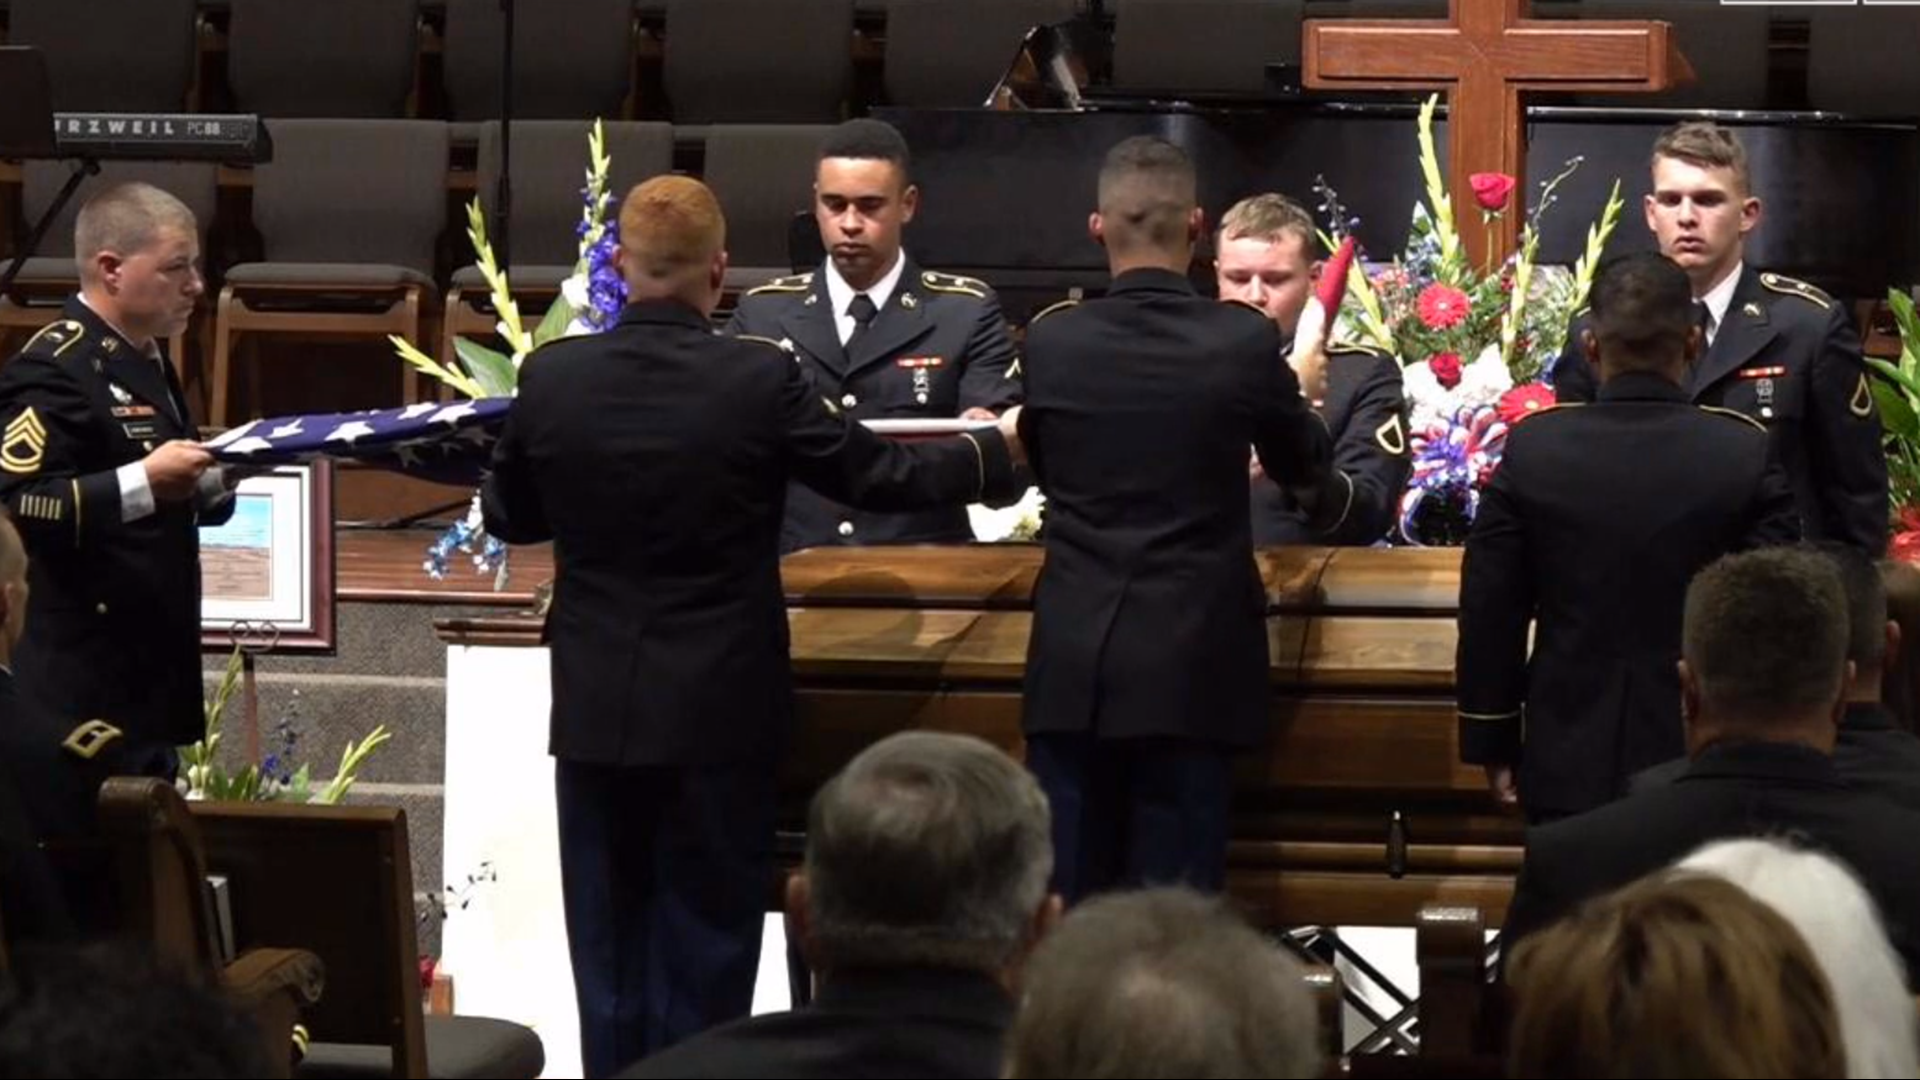 The 24-year-old soldier was laid to rest Monday at the First Baptist Church of Killeen.